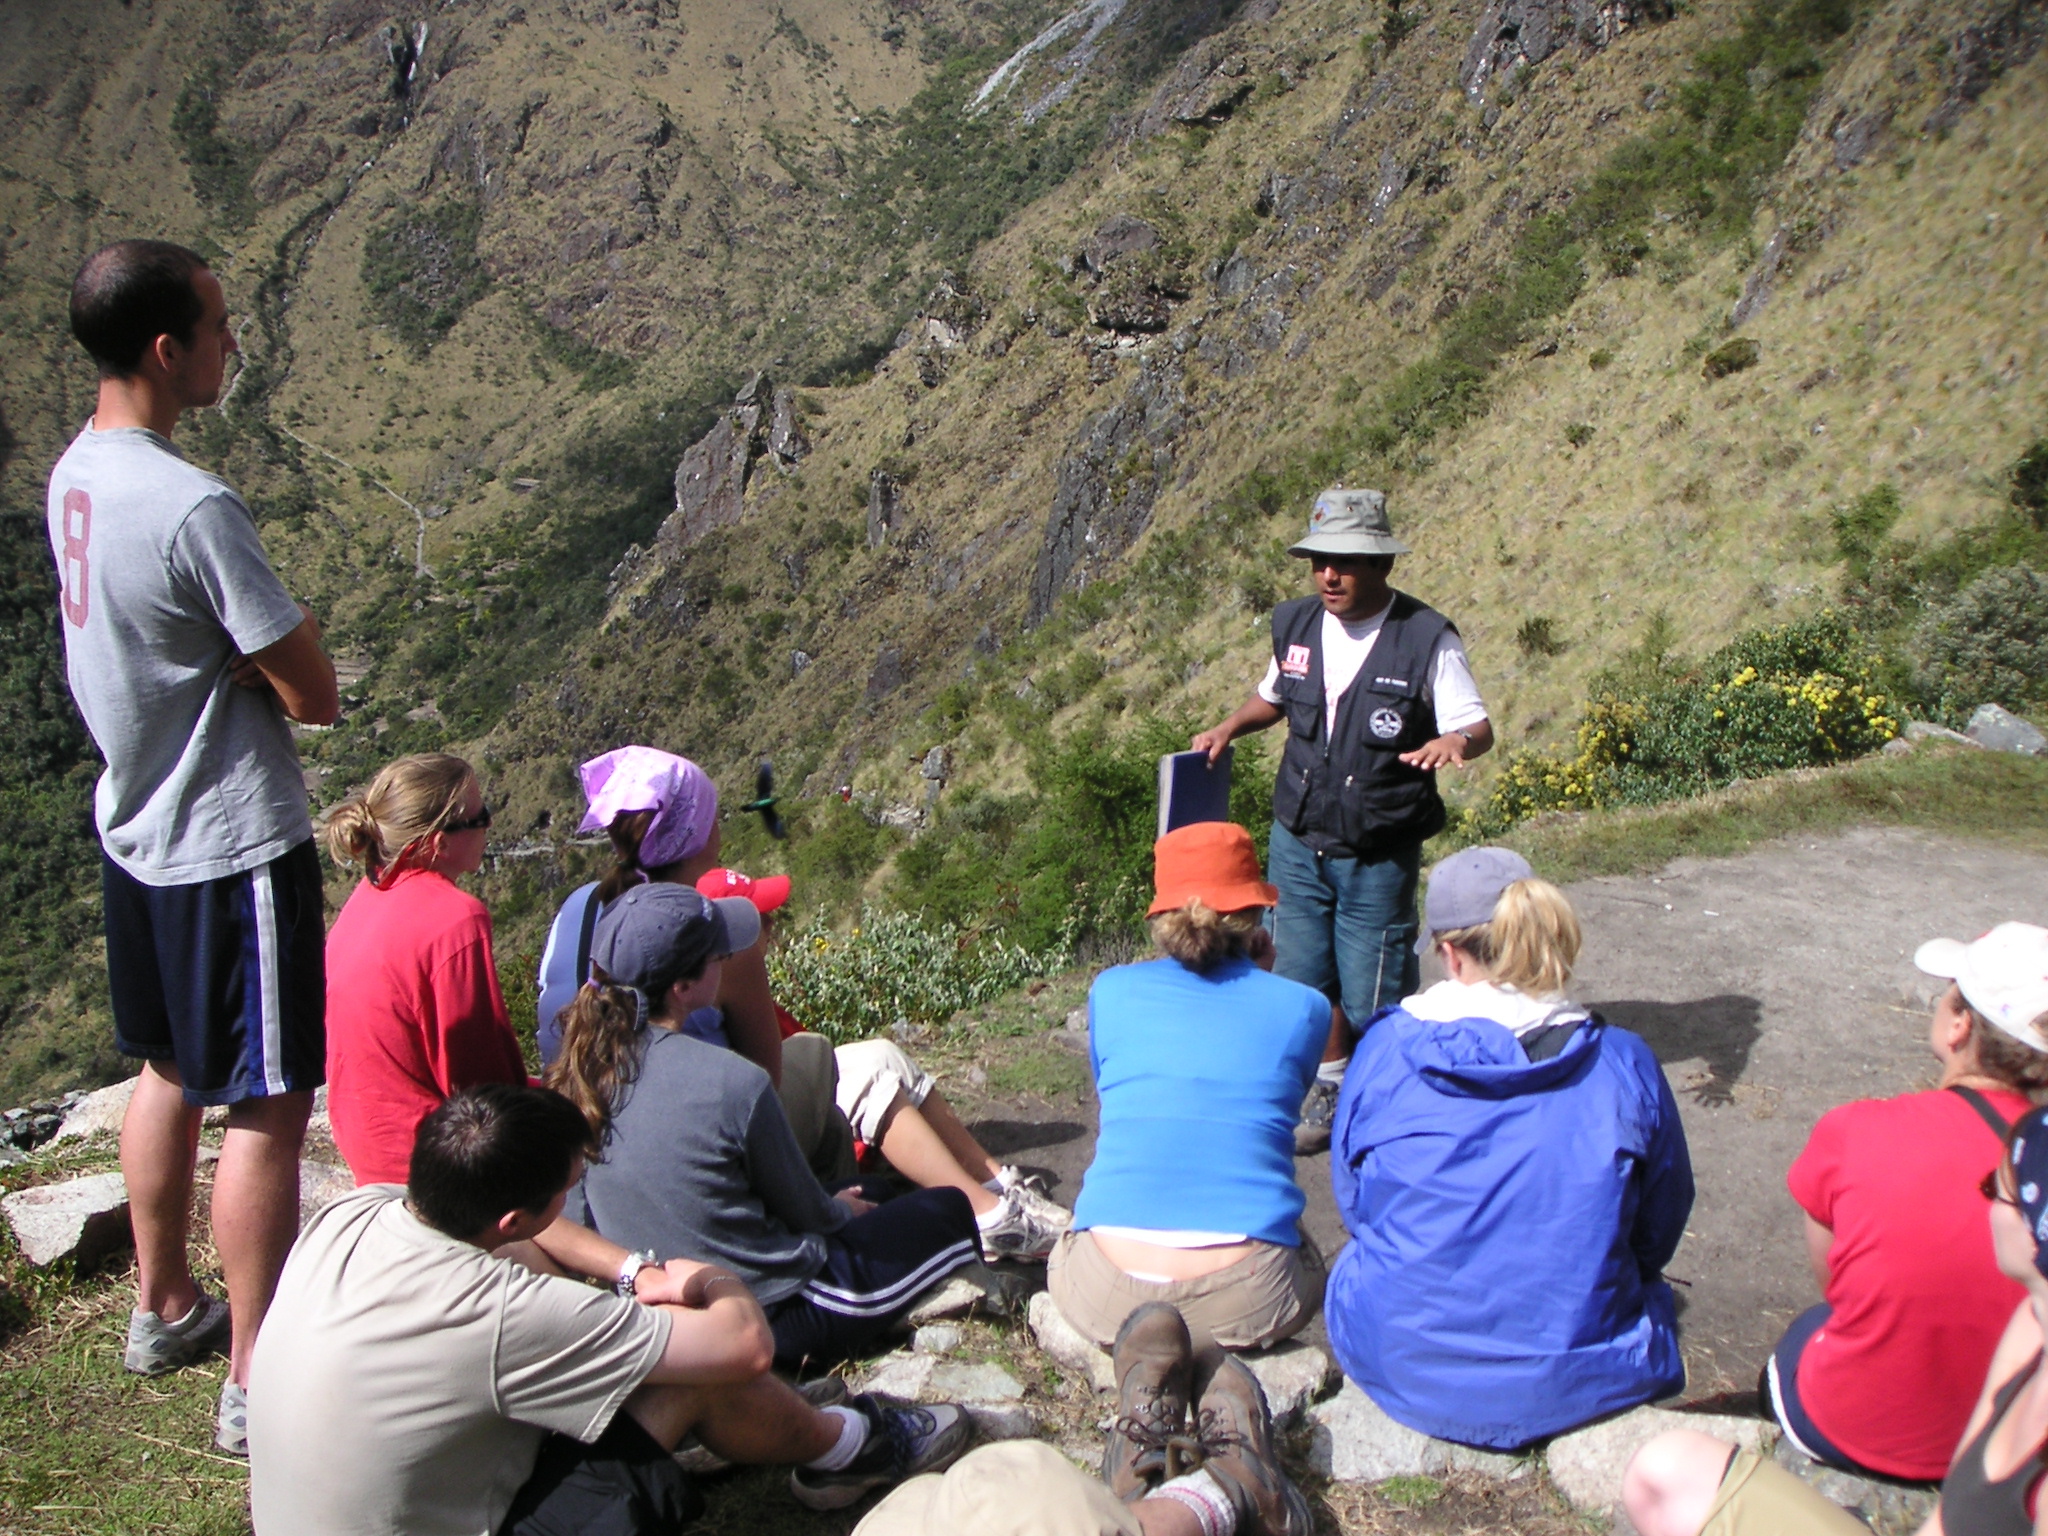 One of our guides from Pachamama Tour Expeditions gives a lecture.